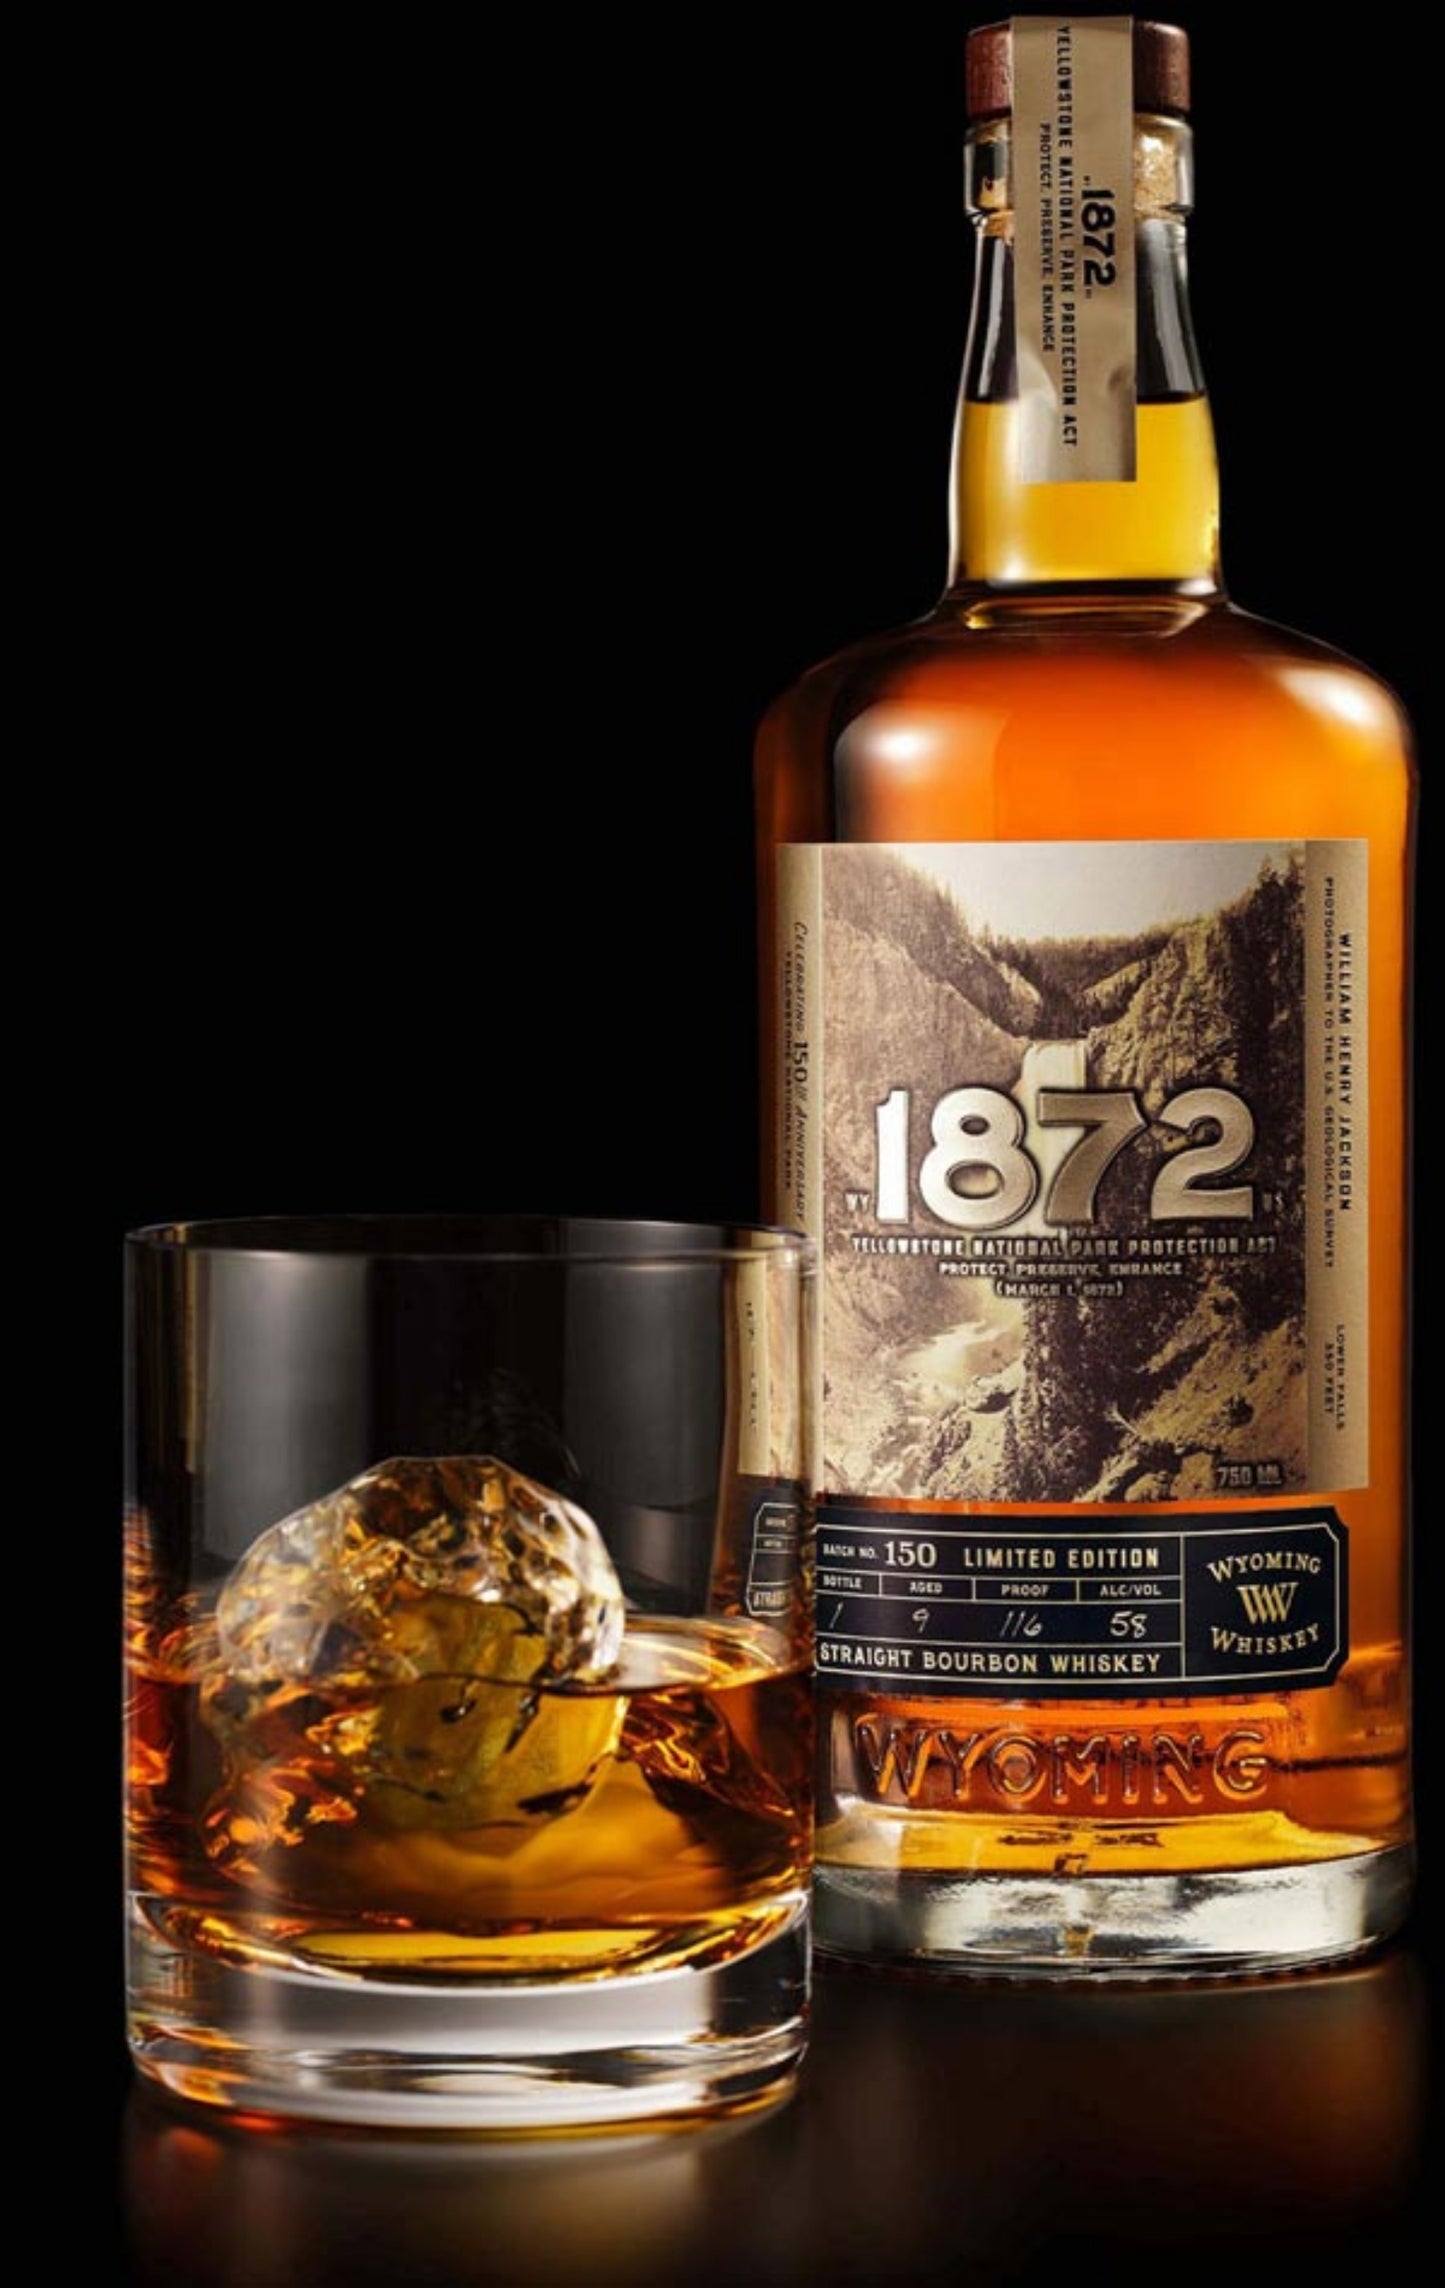 Wyoming Whiskey 1872 Limited Edition Straight Bourbon Whiskey 9 Year | Bottle No. 111